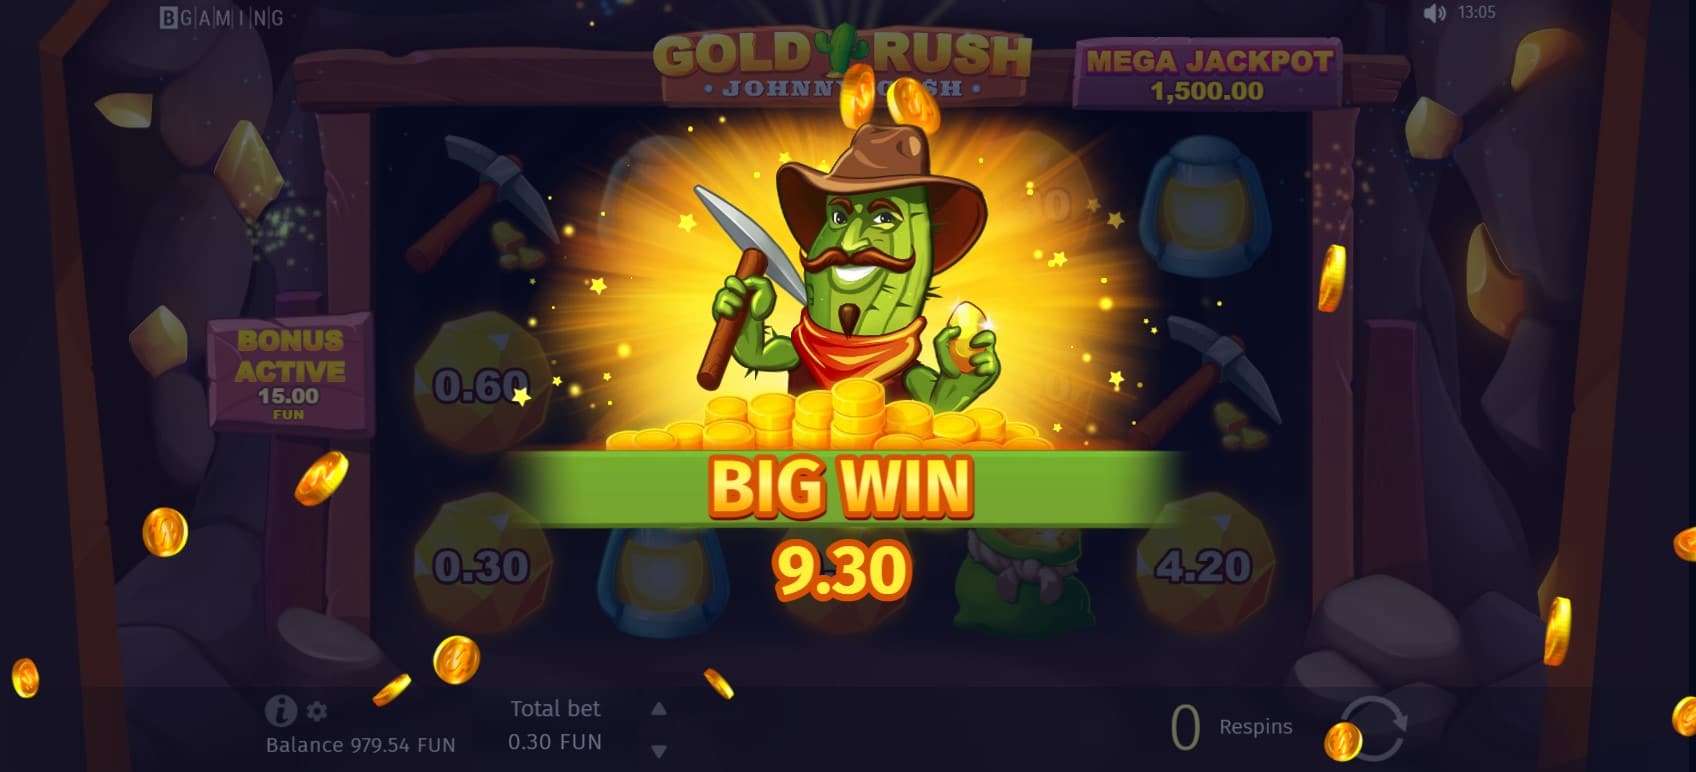 gold rush with johnny cash BGaming gran victoria